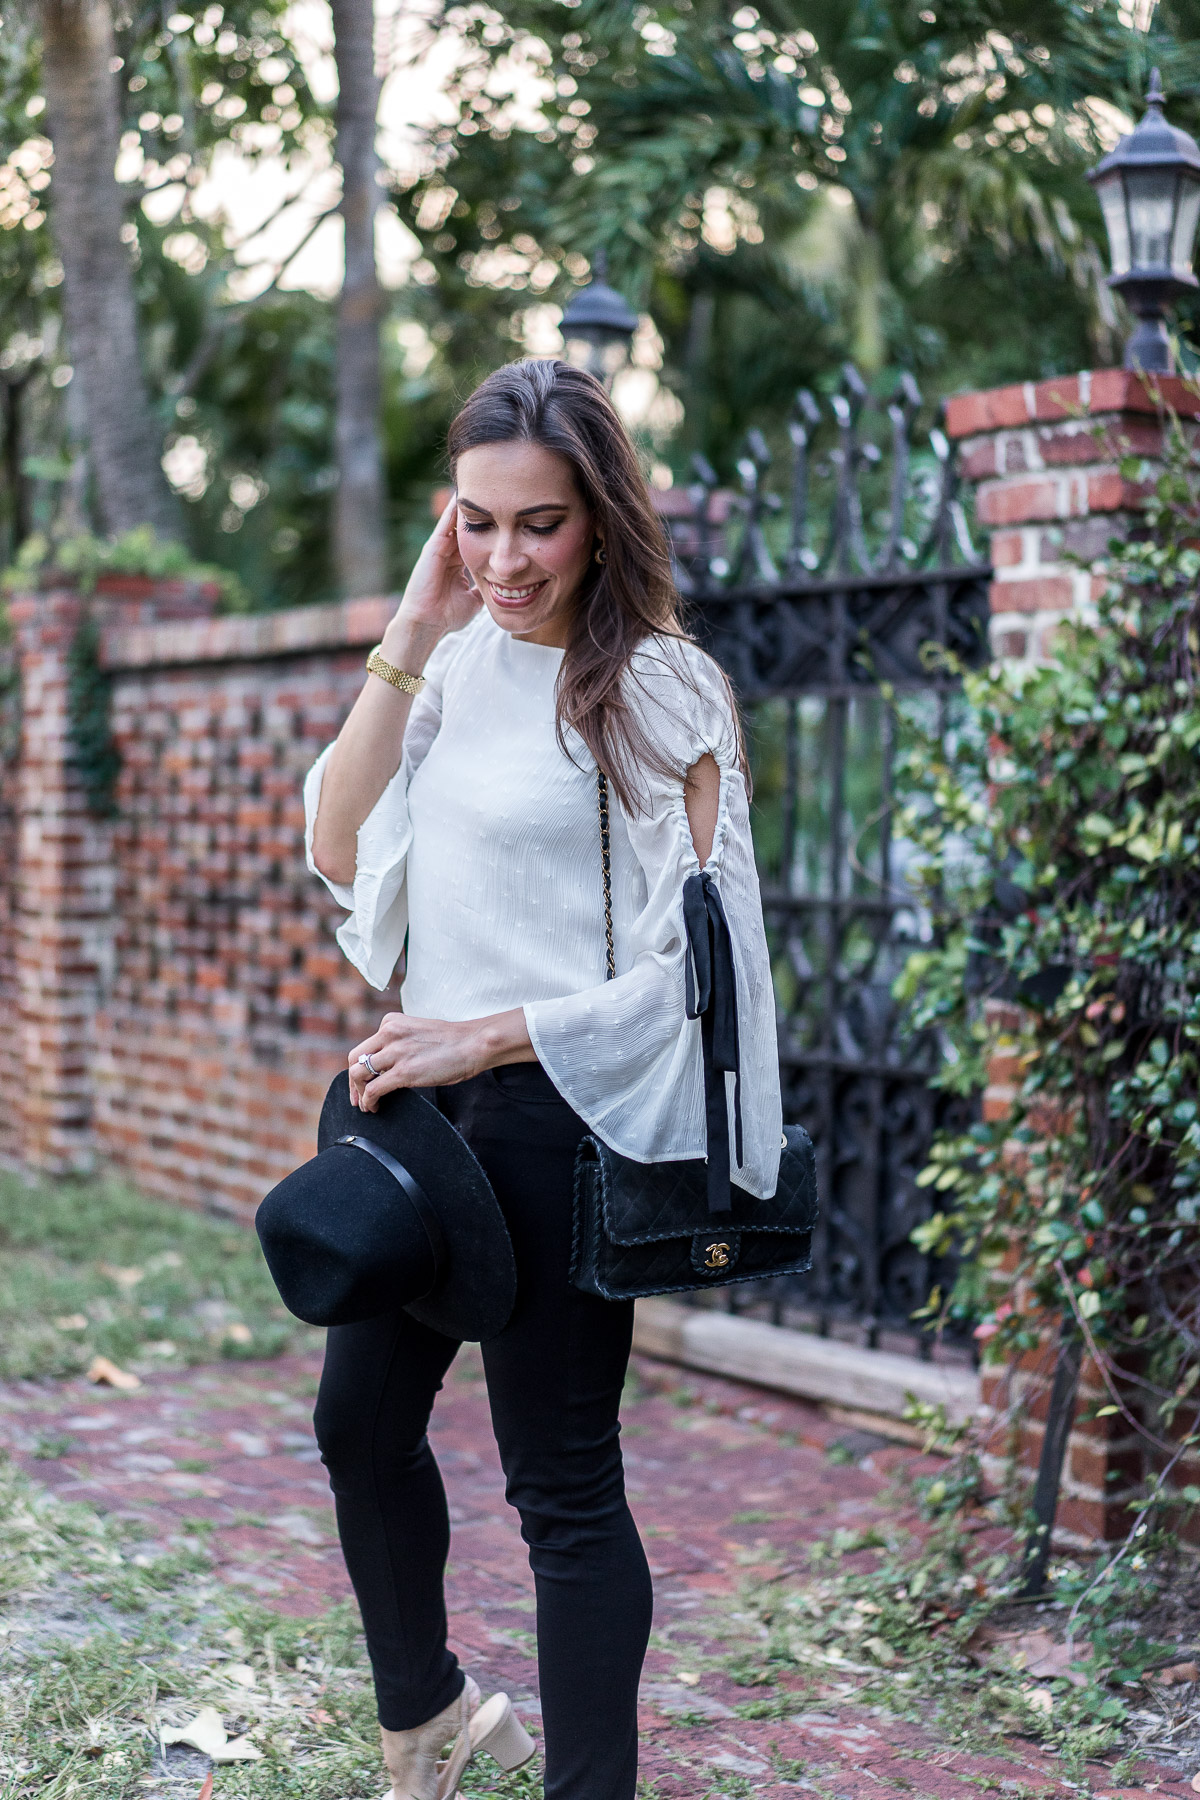 Amanda from A Glam Lifestyle wears Club Monaco bell sleeve top with Rag and Bone fedora and easy black AG legging jeans